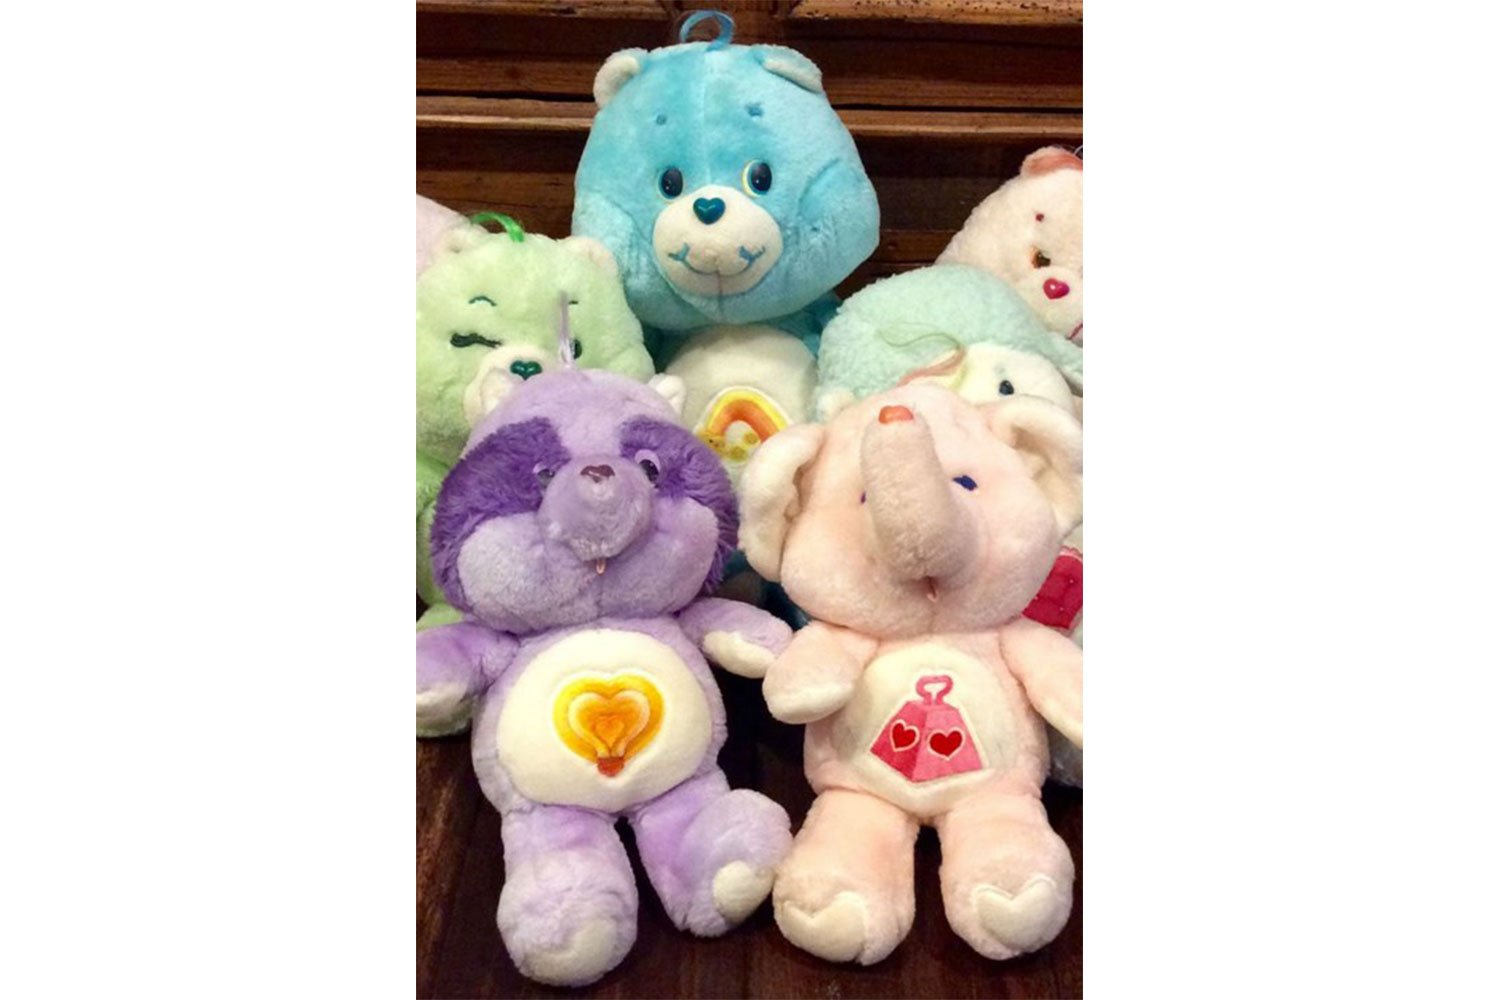 care bears from the 80's